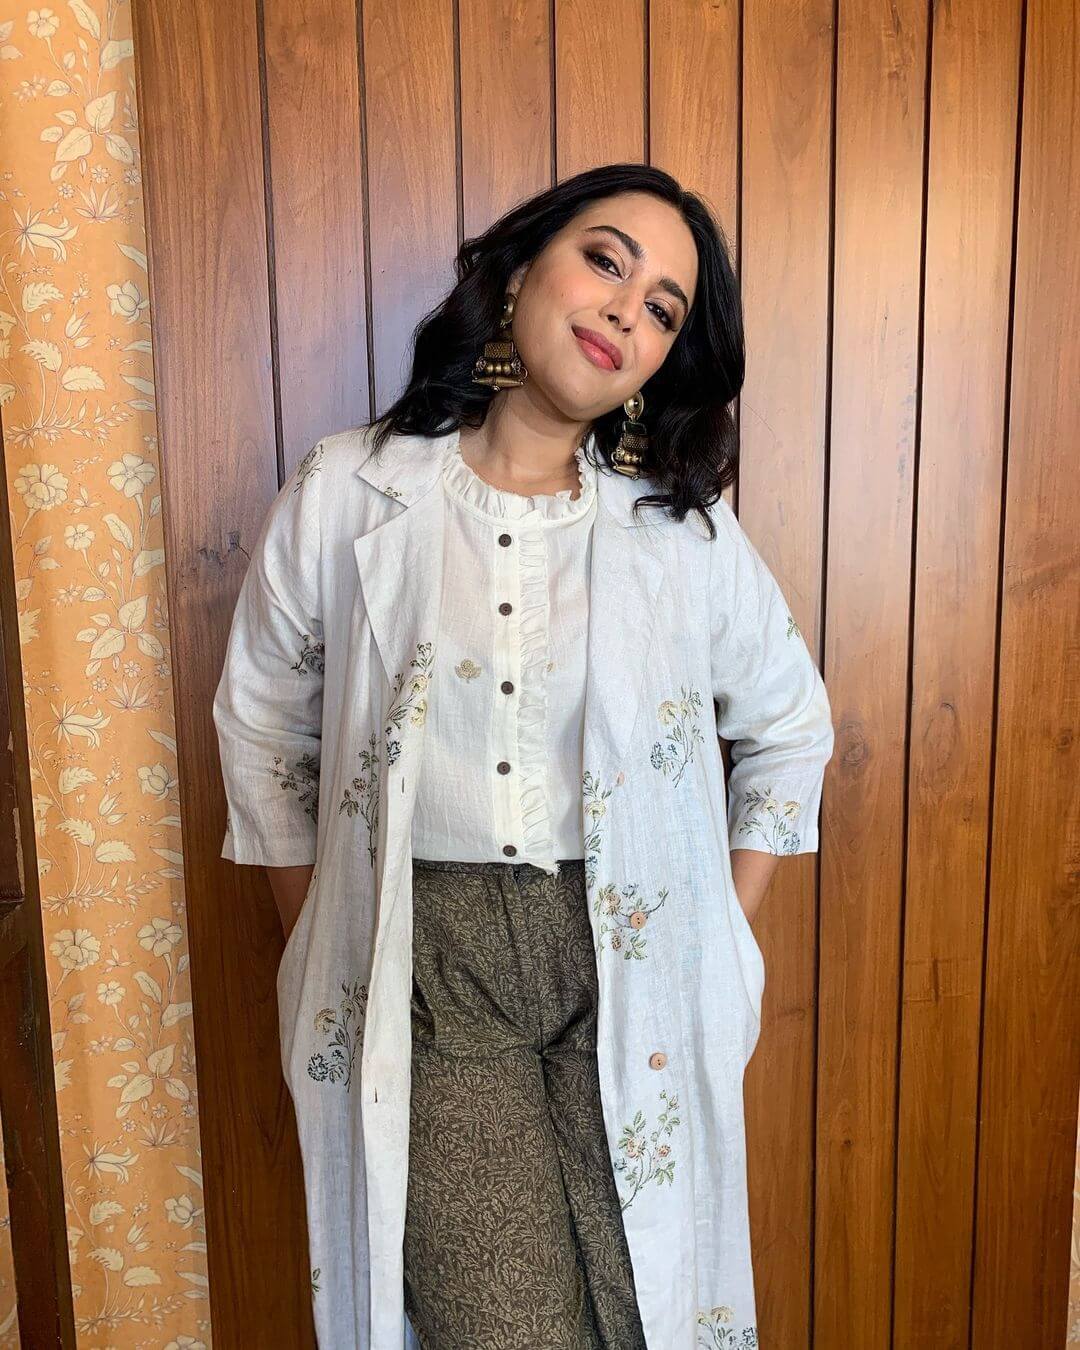 Actress Swara Bhasker in white outfit